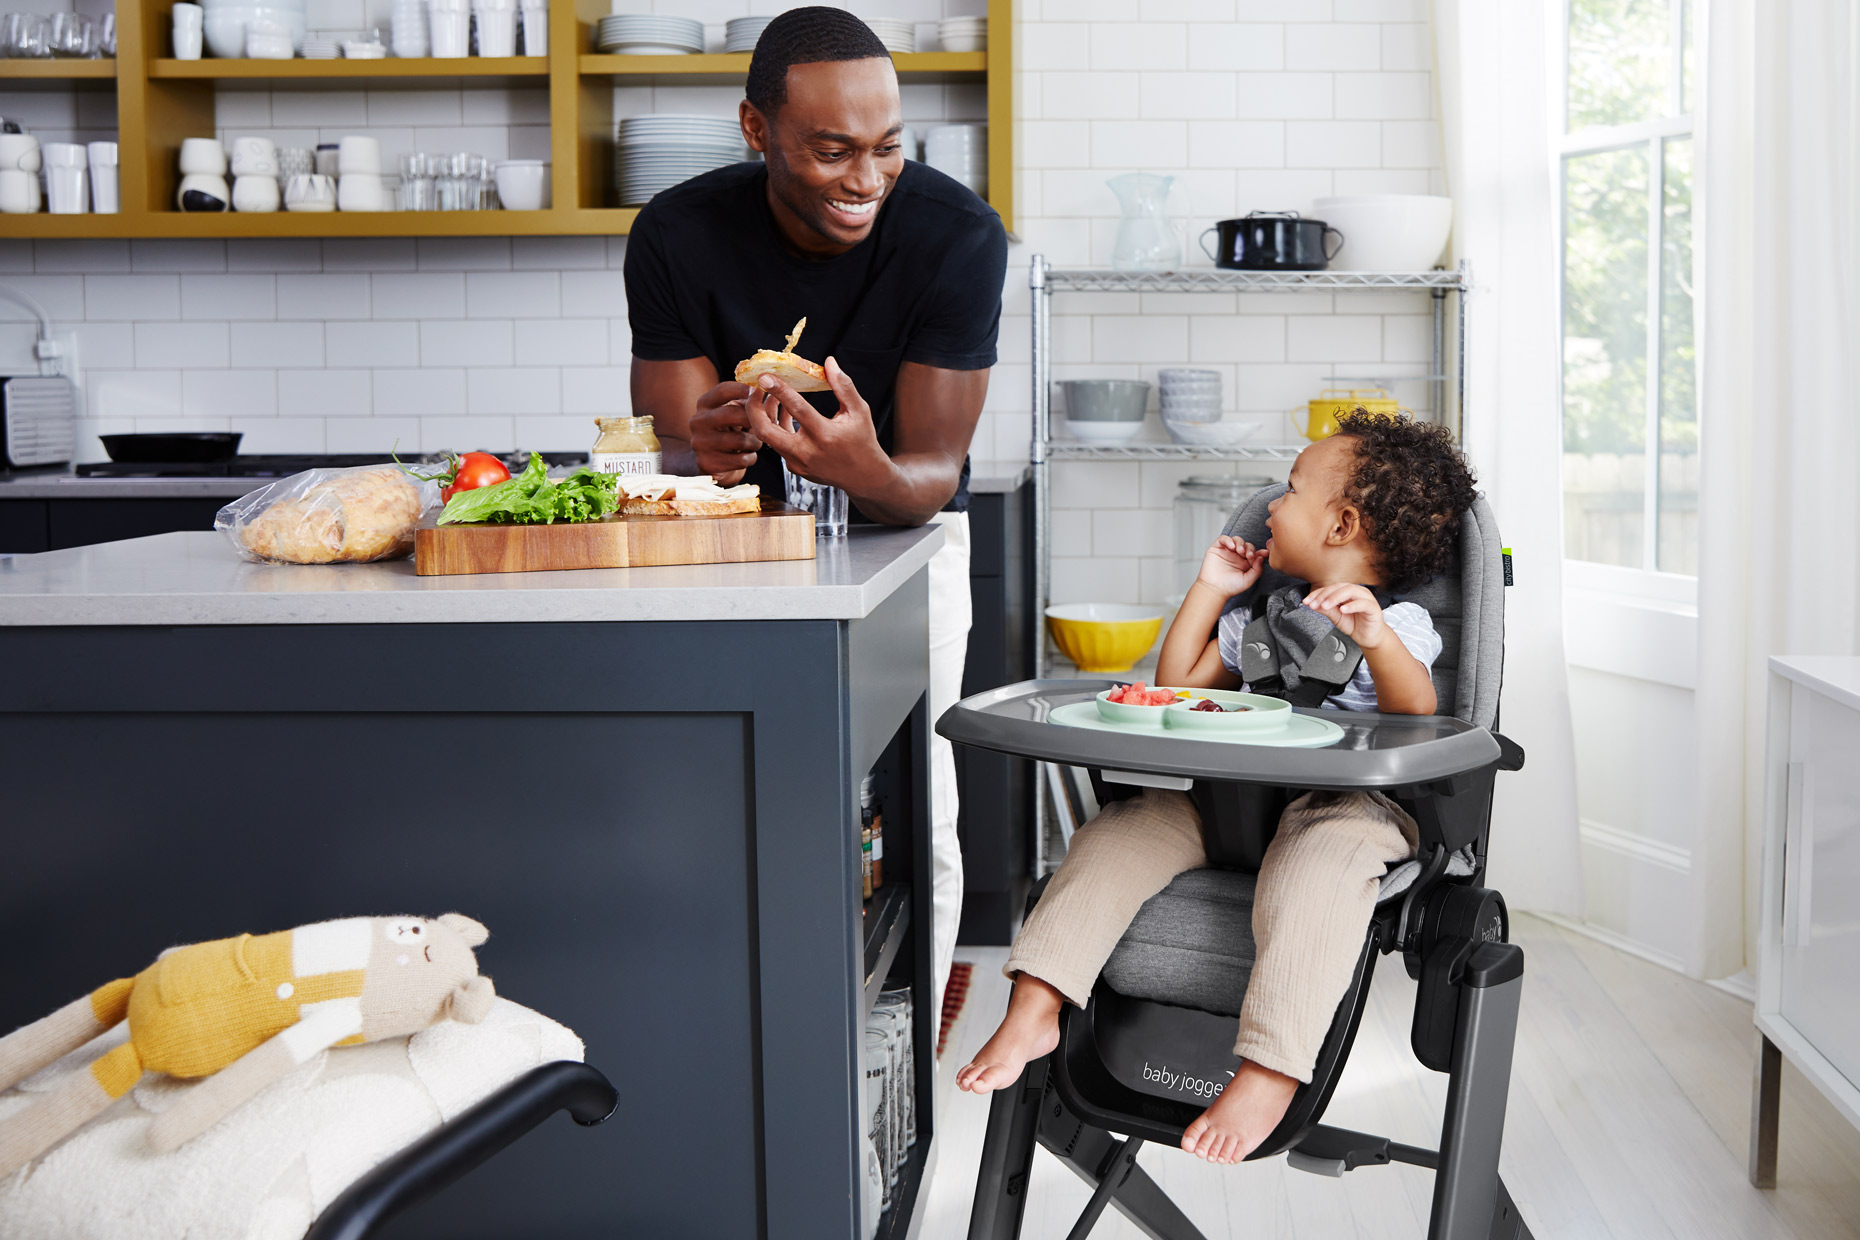 BabyJogger_BBJ_City-Bistro_close-up-of-child-eating-in-chair_4727